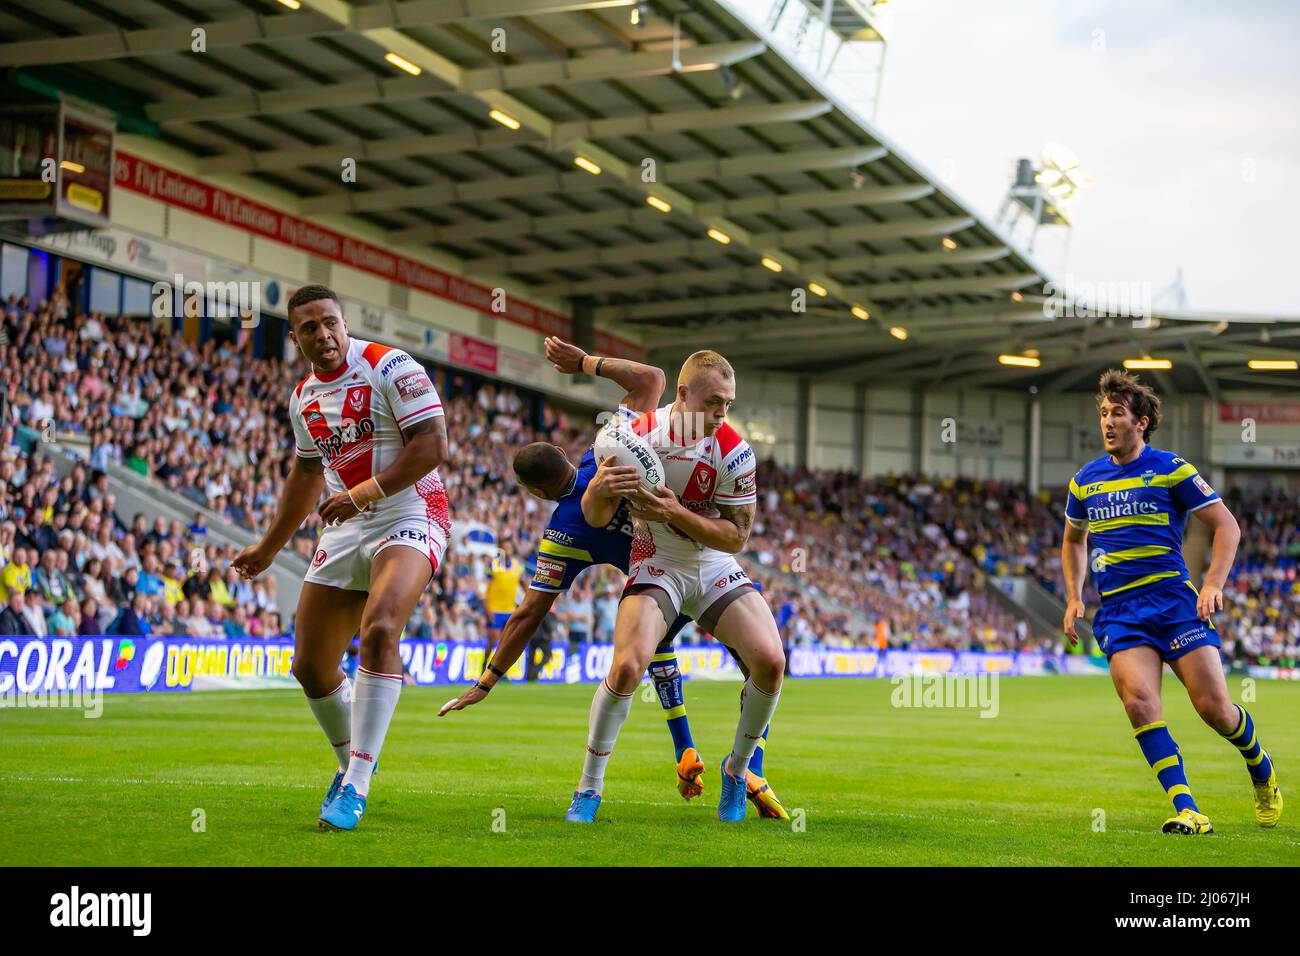 Warrington 16 July 2015: Warrington Wolves hosted St Helens at the Halliwell Jones Stadium. St Helens cross the try line to score Stock Photo